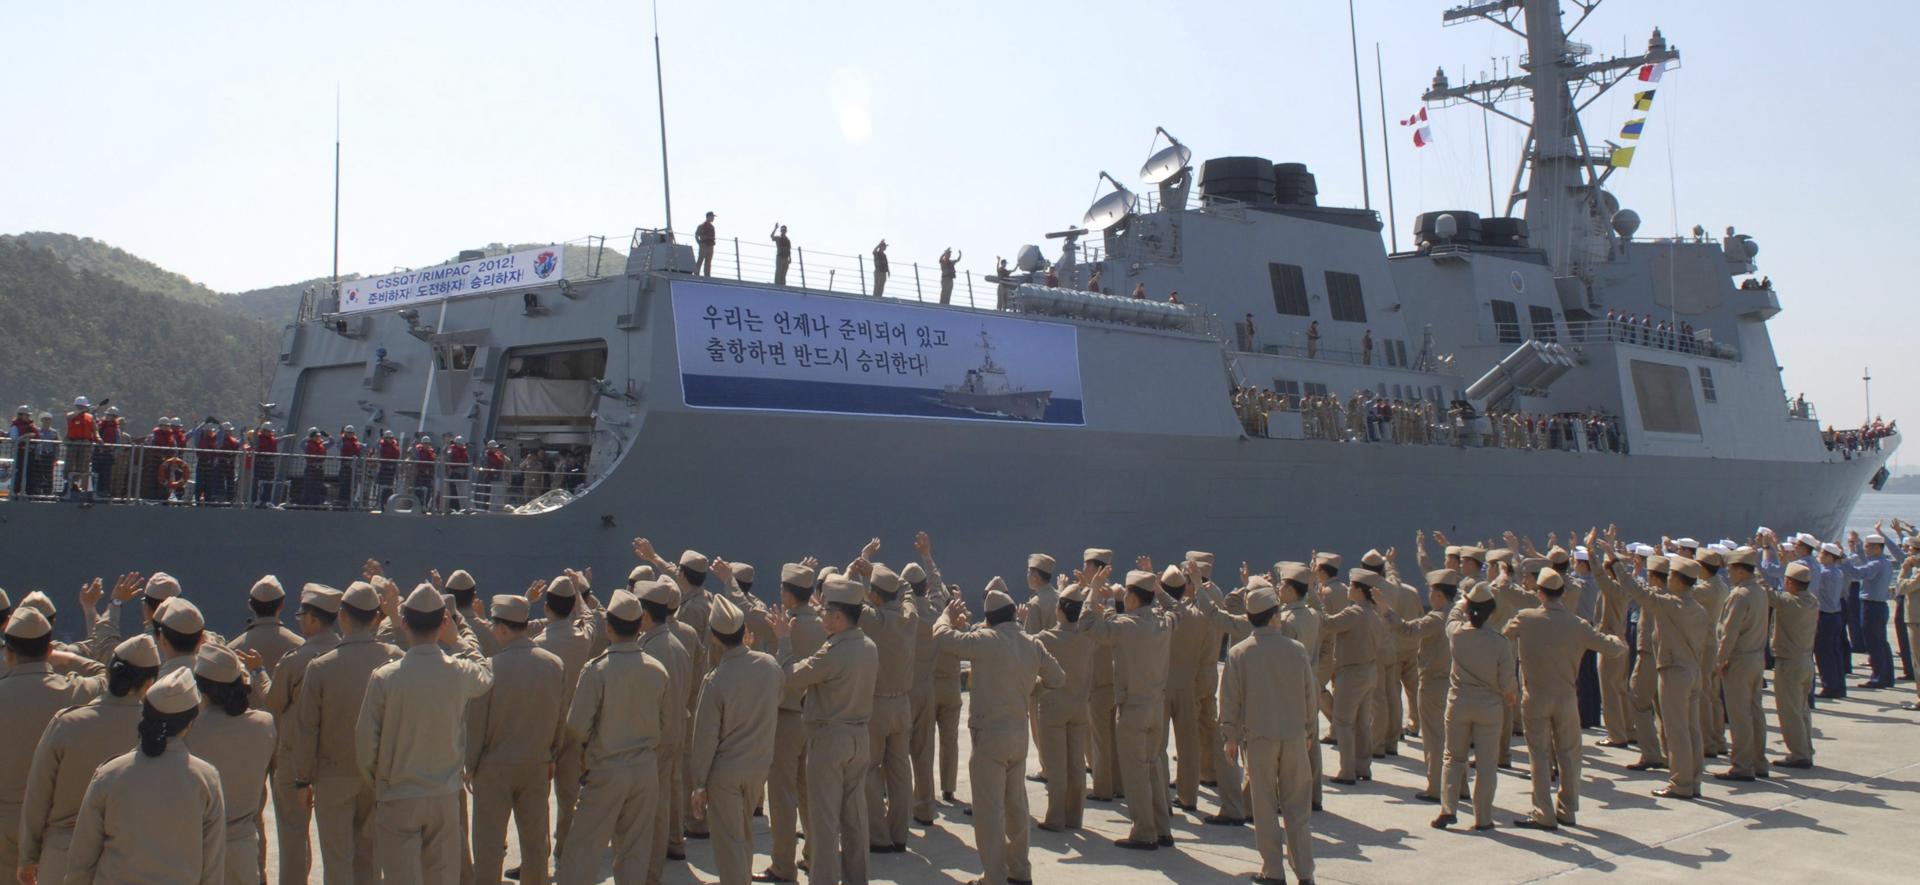 South Korean destroyer Yulgok Yi I before leaving the Jinhae port in South Korea on 4 May 2012. EFE-EPA FILE/Yonhap HANDOUT/SOUTH KOREA OUT/EDITORIAL USE ONLY/NO SALES